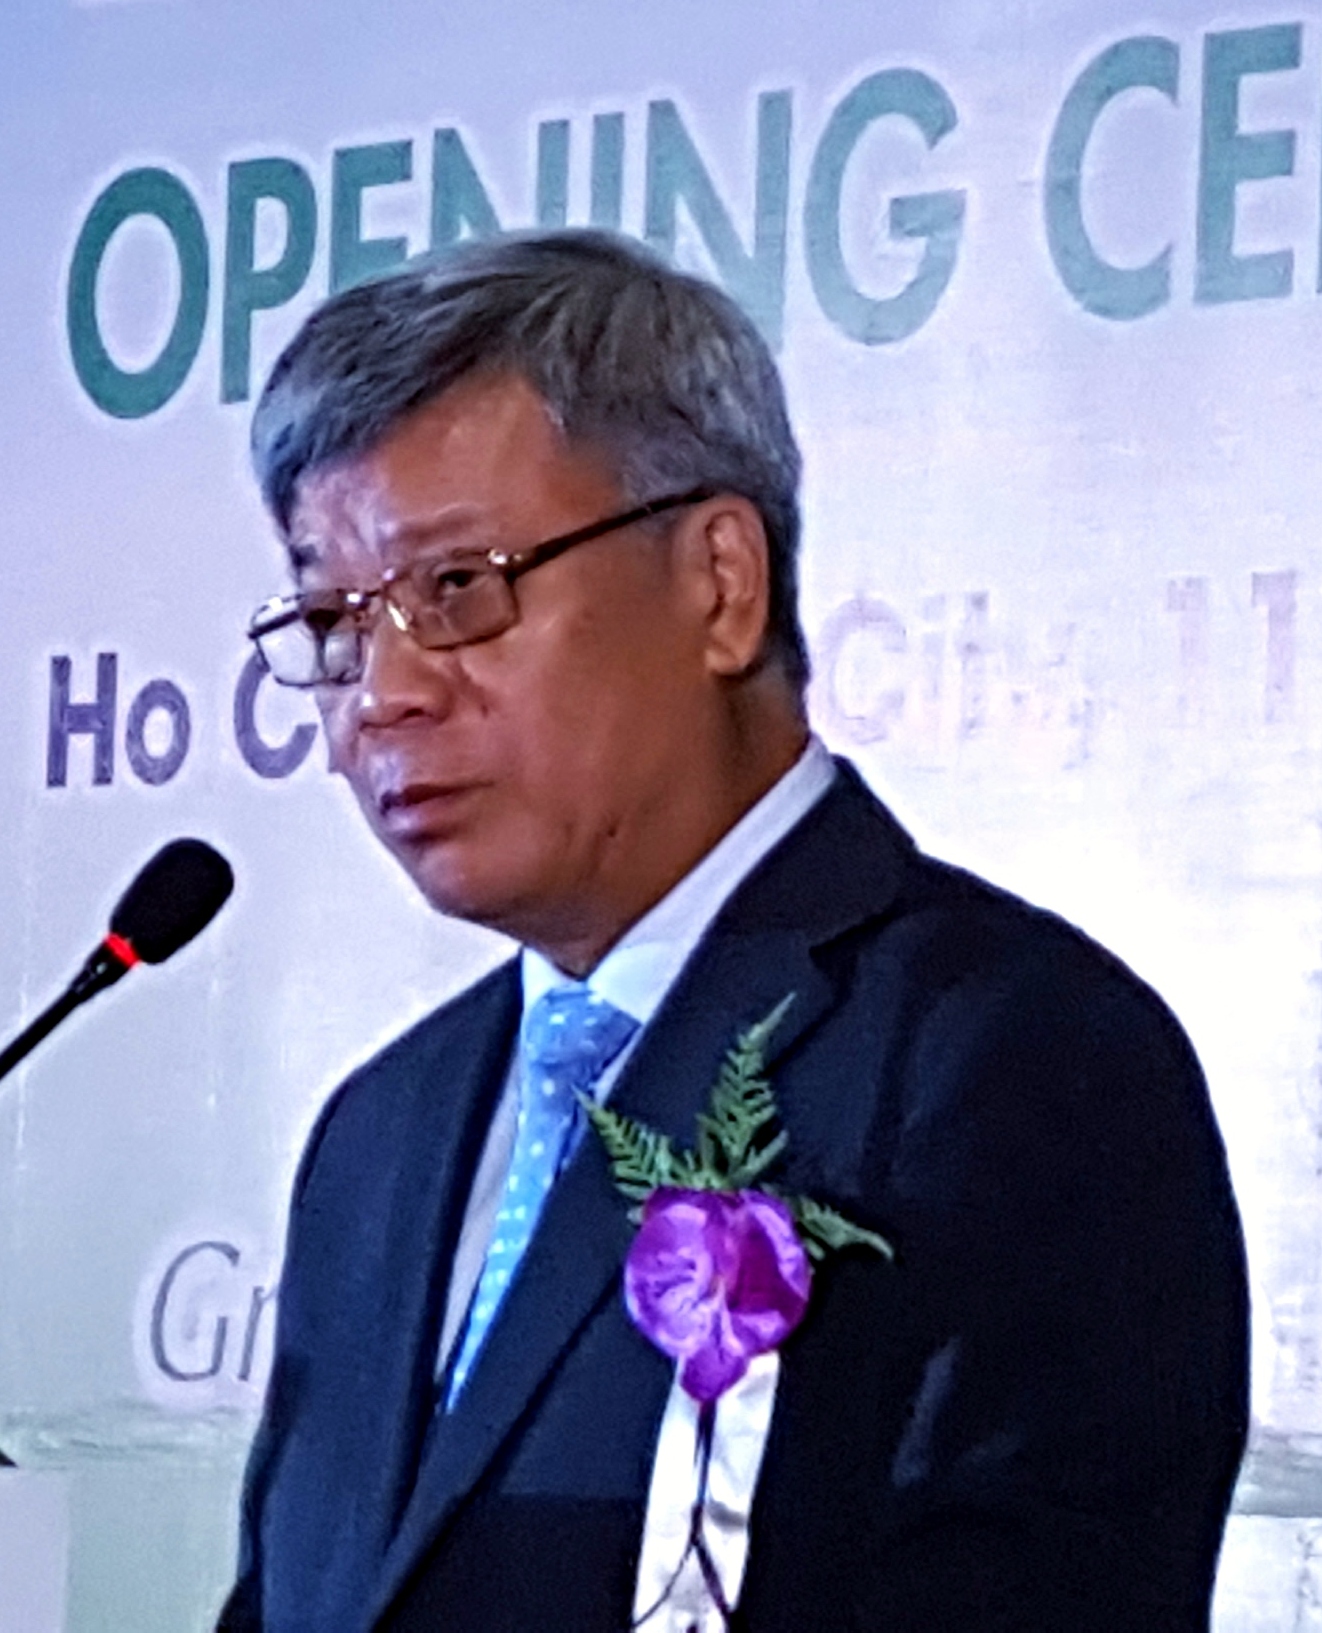 Vice Minister Tran Viet Thanh of the Vietnamese Ministry of Science and Technology welcoming dignitaries and delegates to the EPIF 2017.